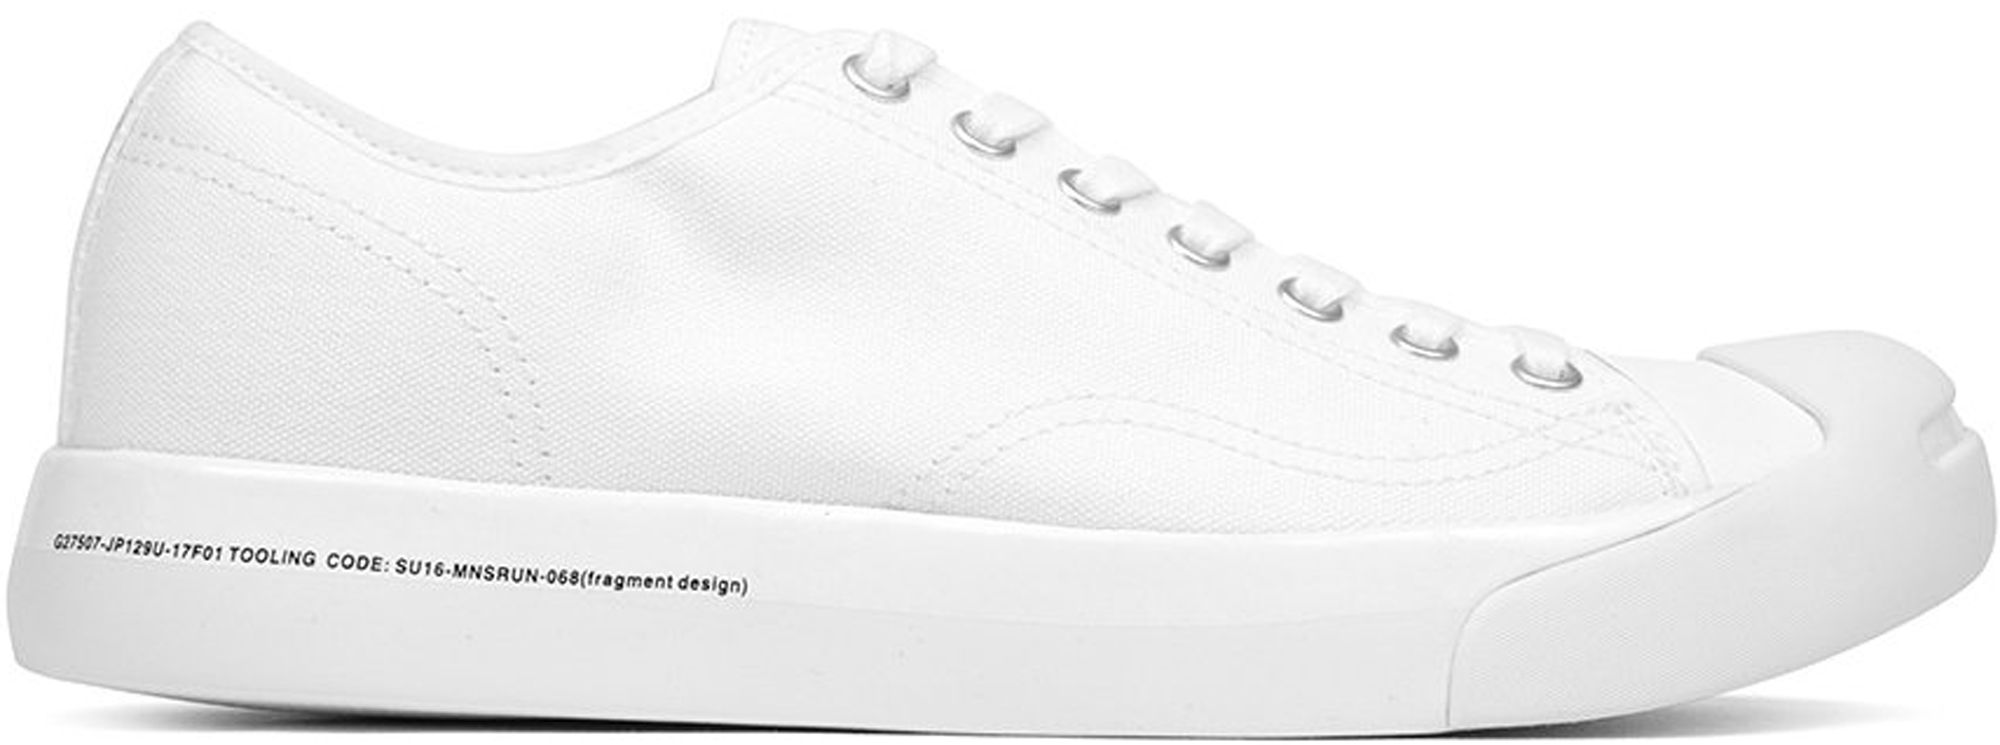 converse purcell white